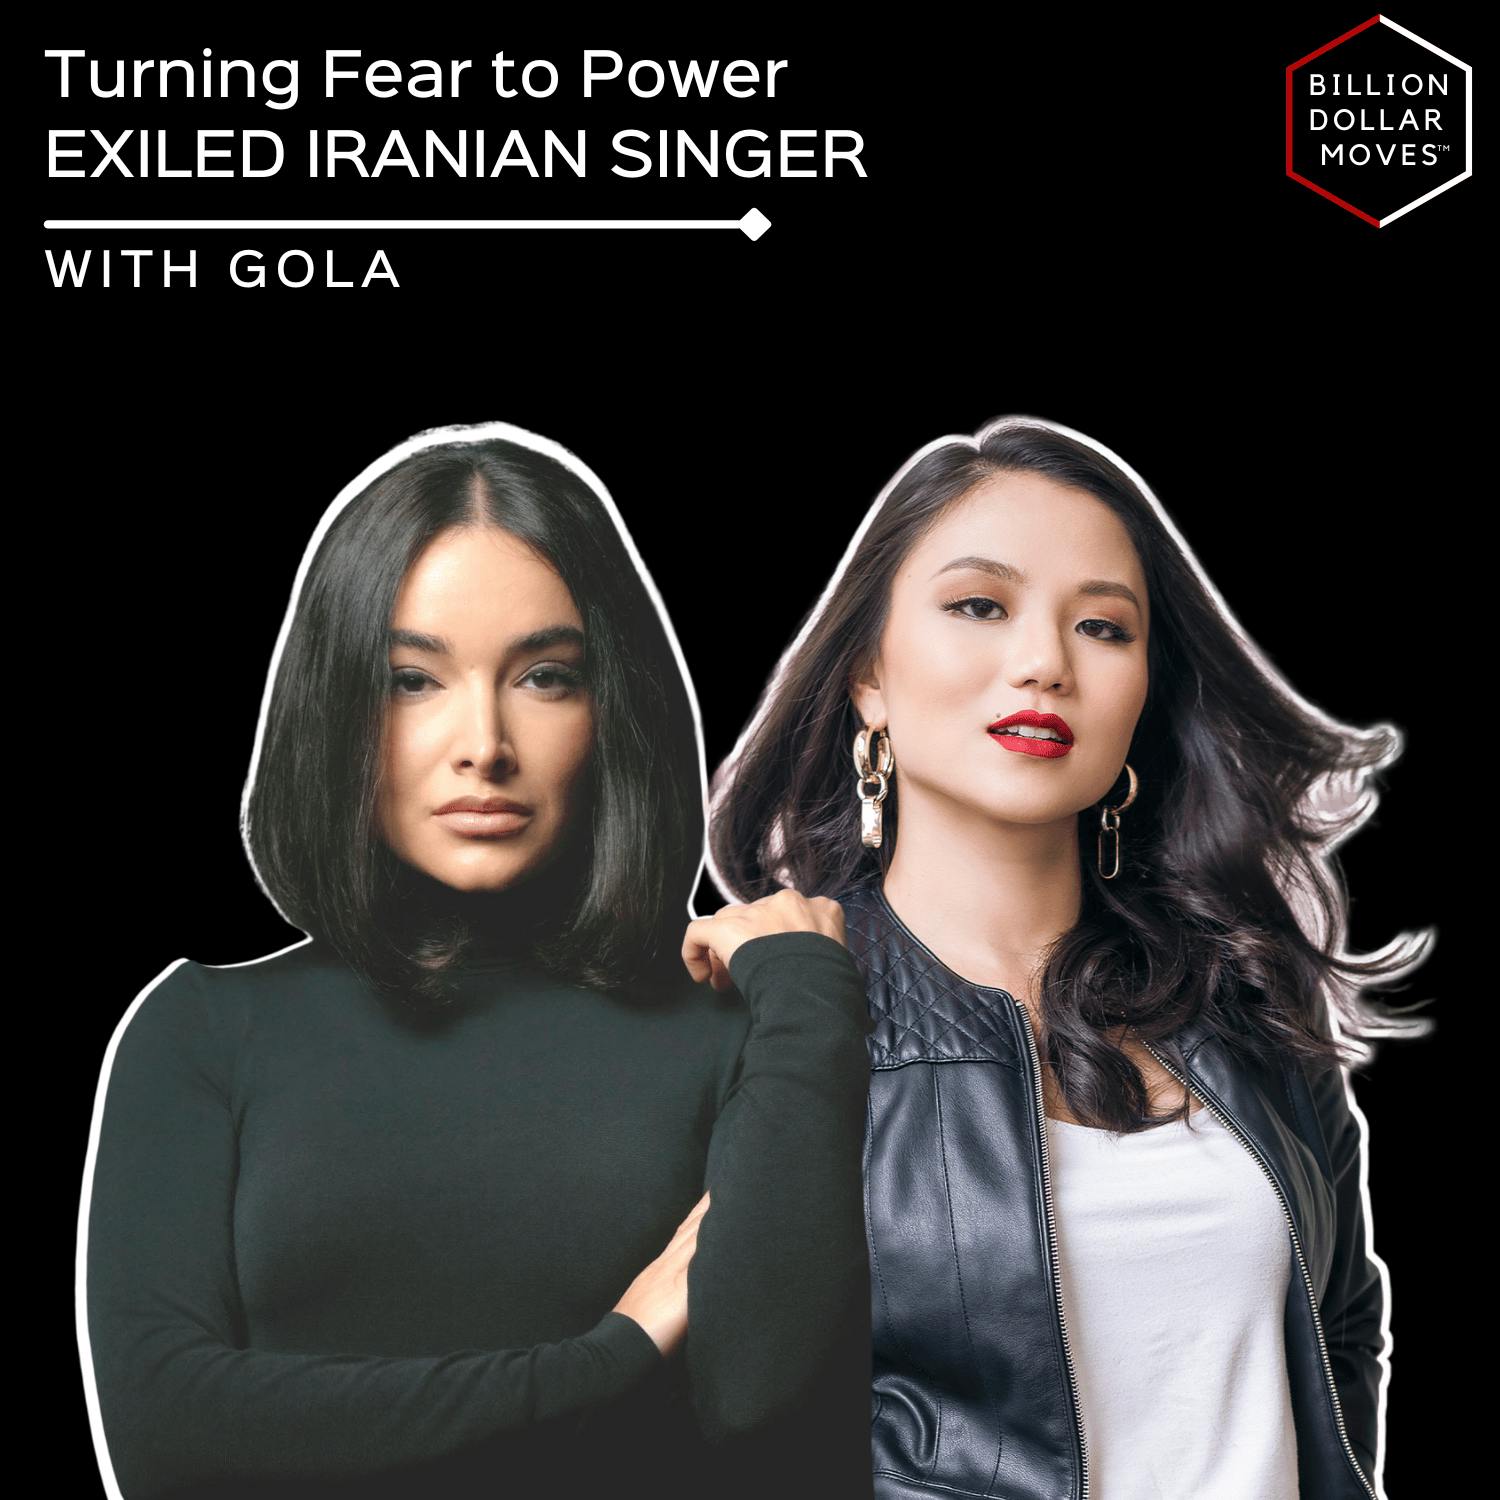 Turning Fear into Power: with Exiled Iranian Singer, Gola